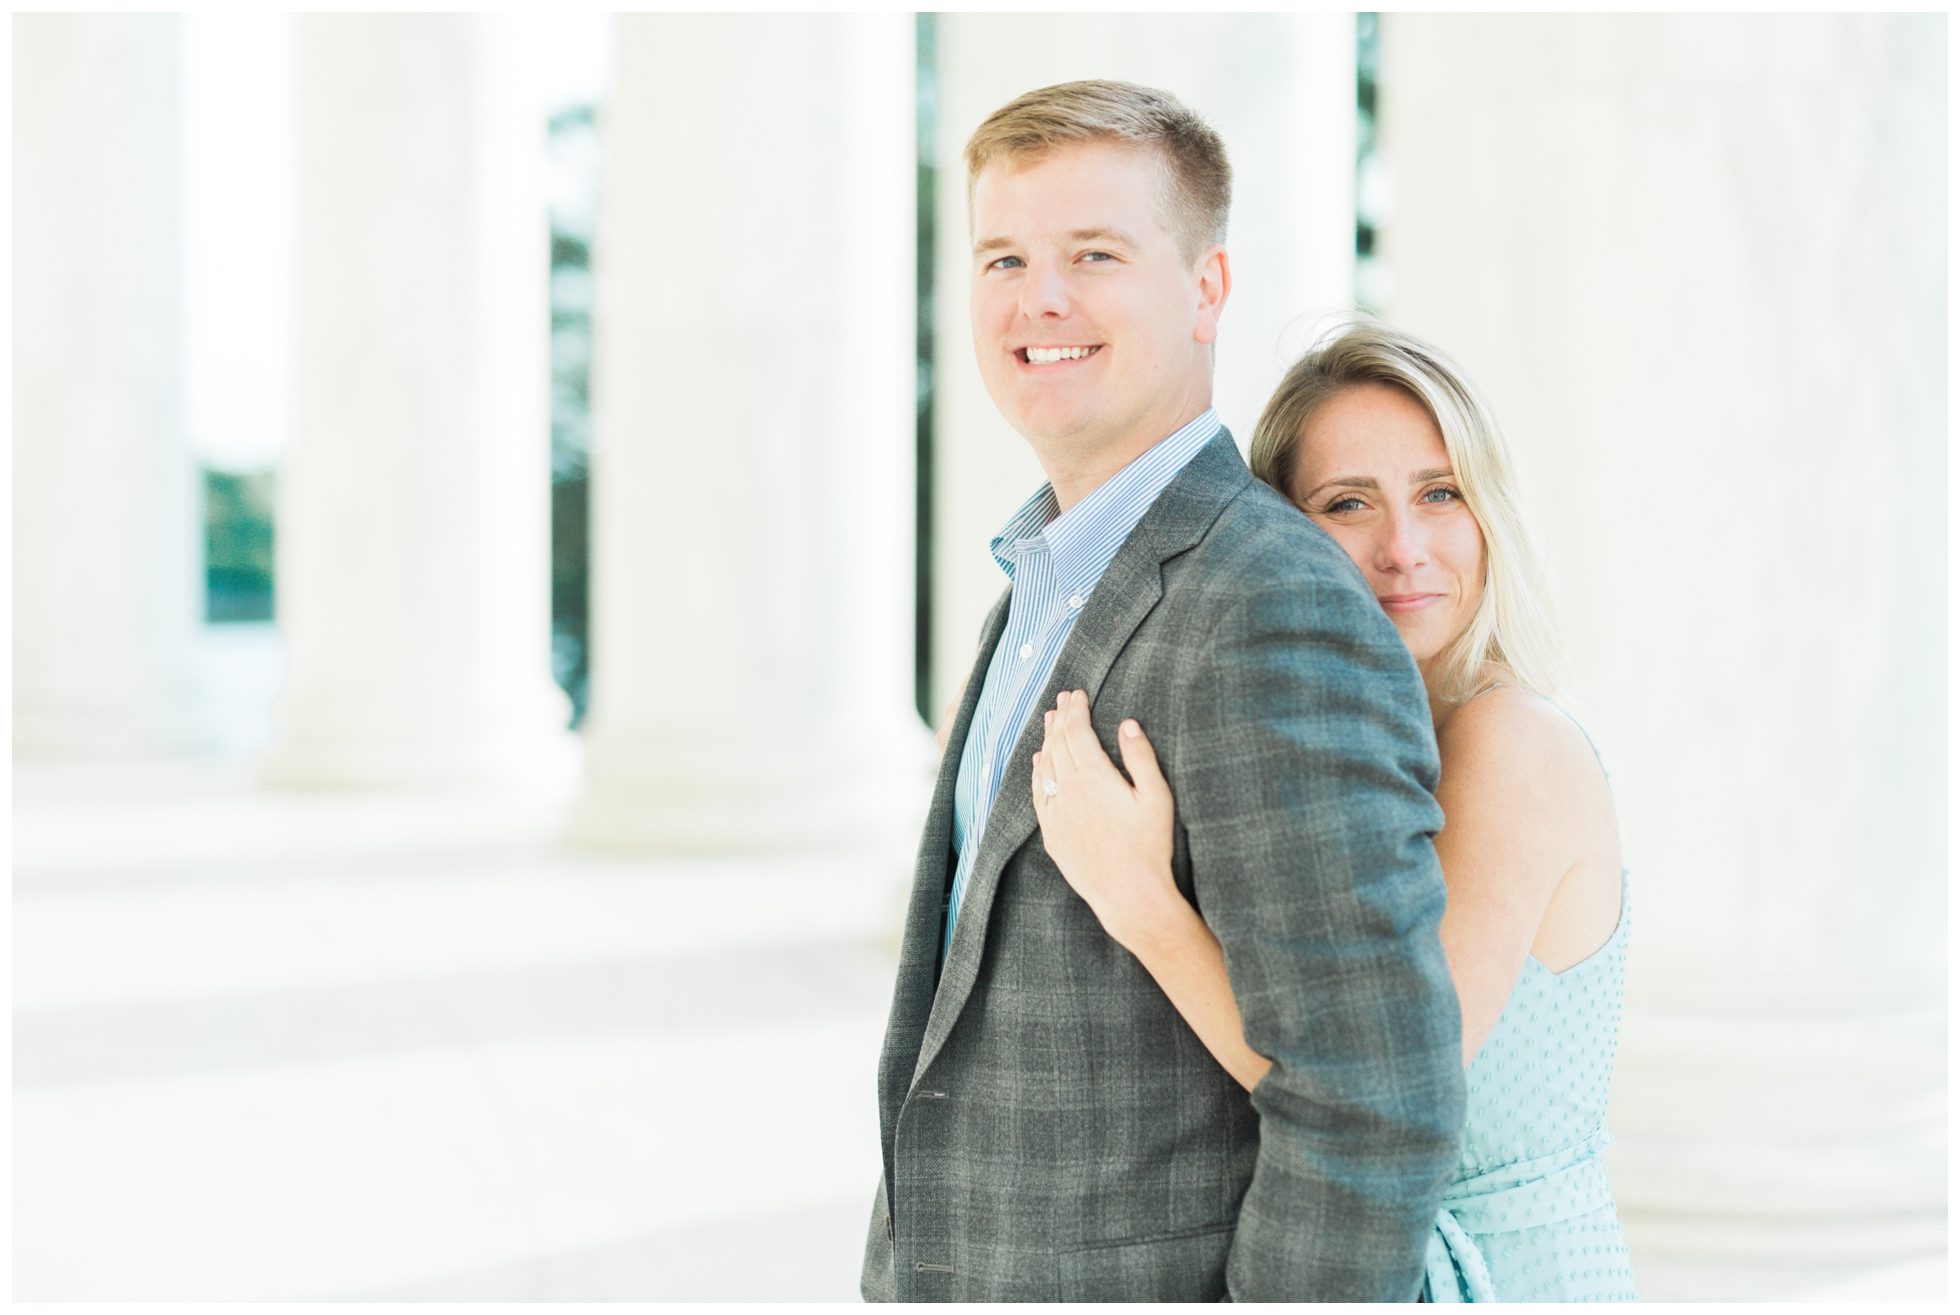 A Classic June Sunrise Engagement Session at the Jefferson Memorial